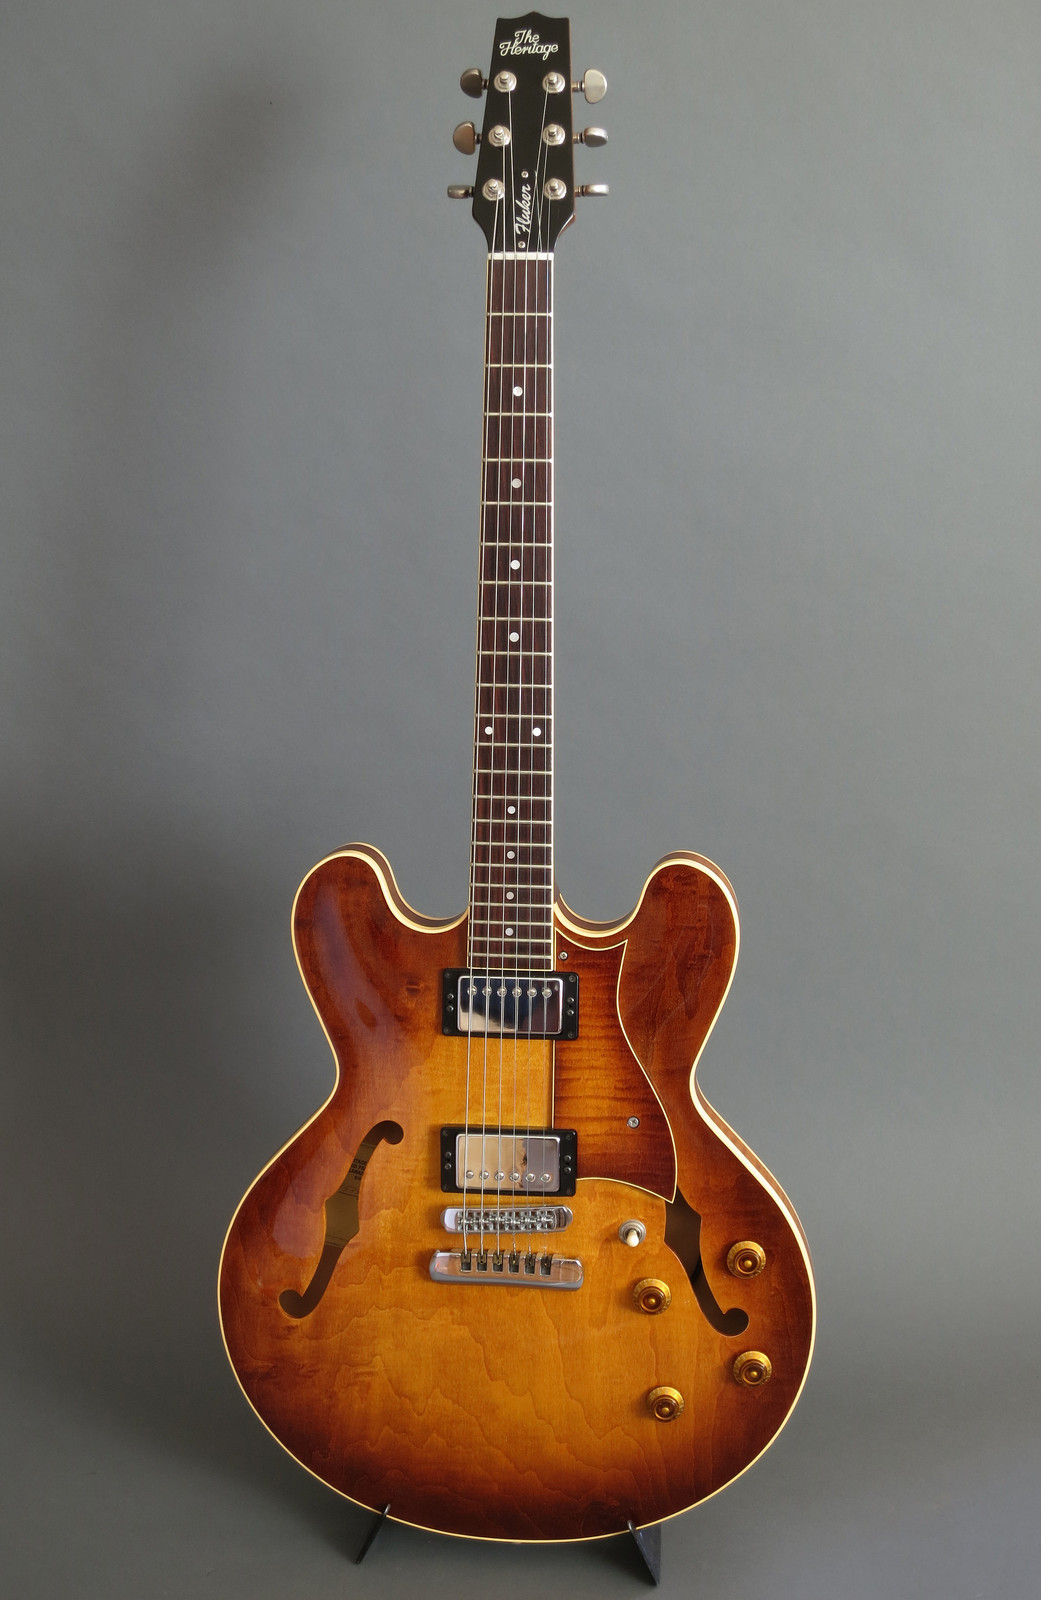 ES-335 style guitar love thread, no telecasters allowed-53560_57-jpg